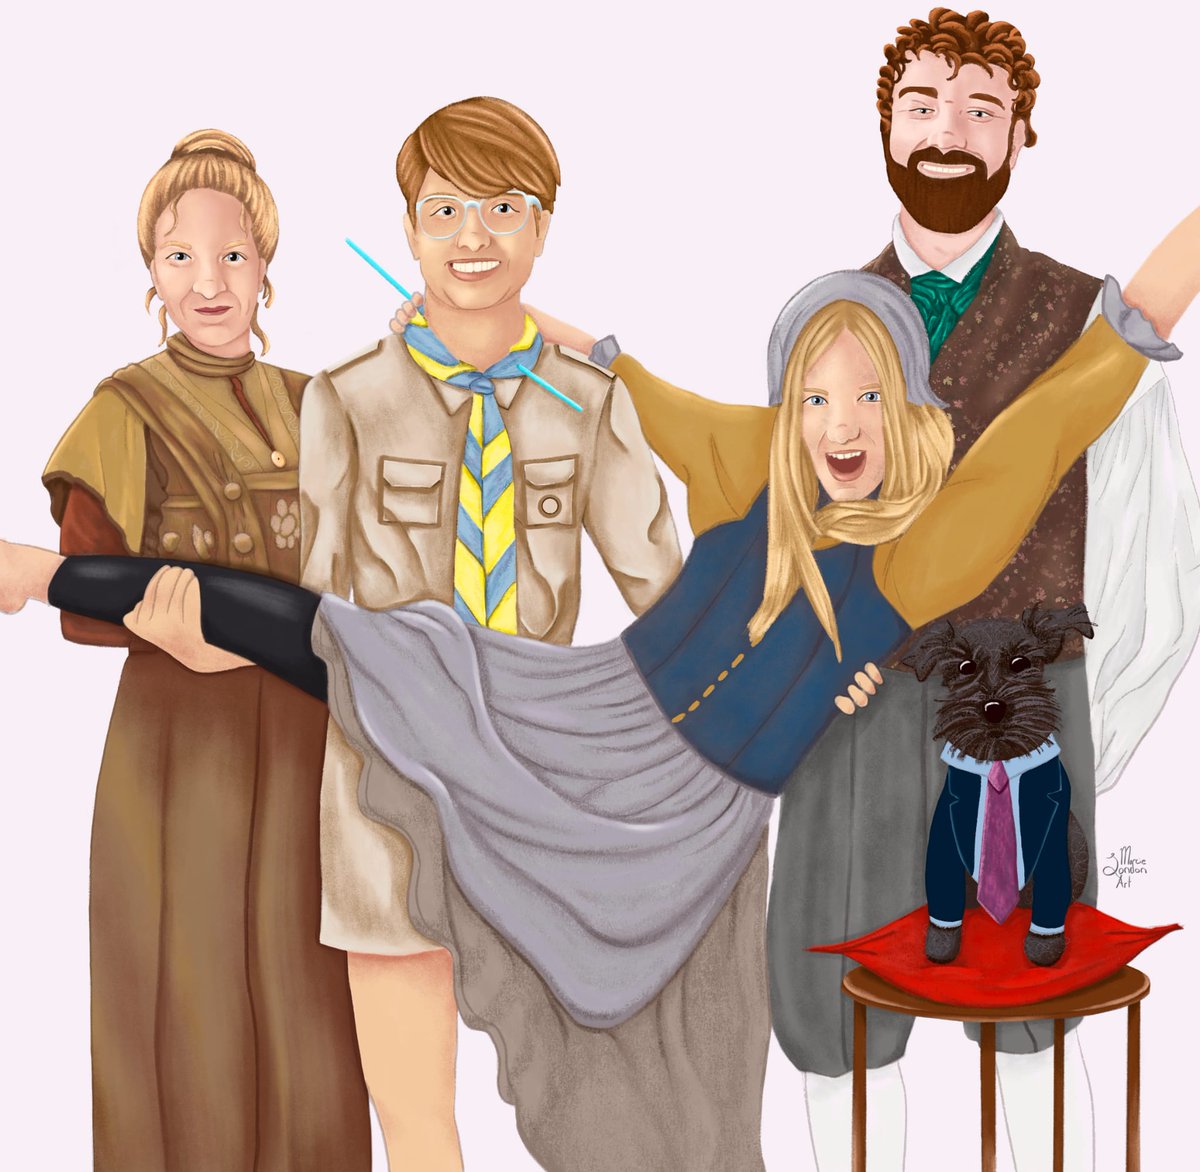 For the 3rd year in a row @MarcieLondonArt has produced a wonderful family portrait for us. This year we are #bbcghosts. We particularly like Neville as Julian 🤣 @sheula_barlow @JimHowick